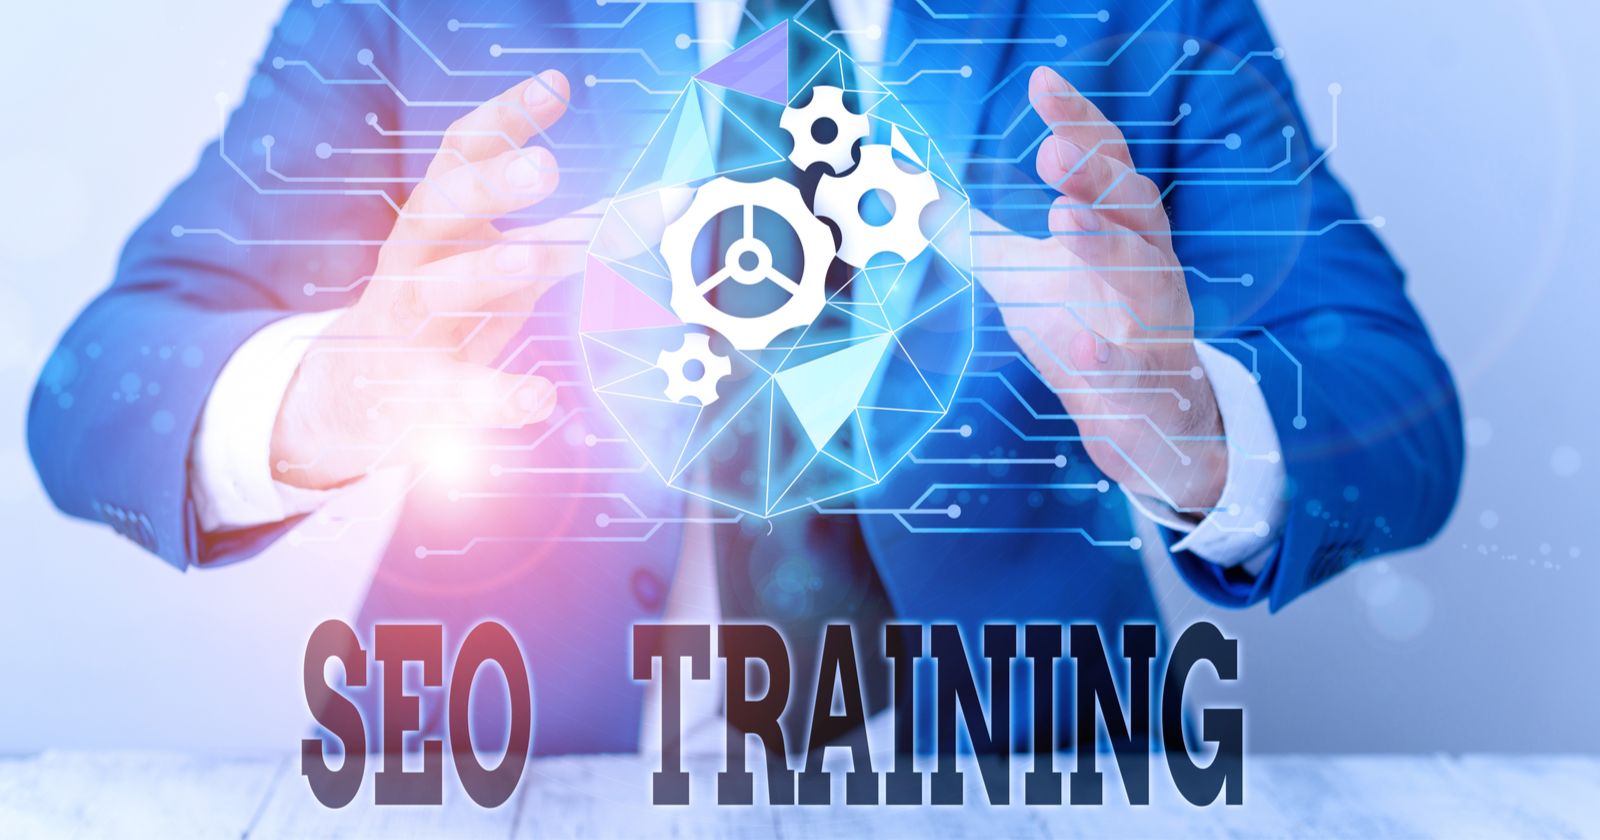 SEO Training Programs for Every Experience Level